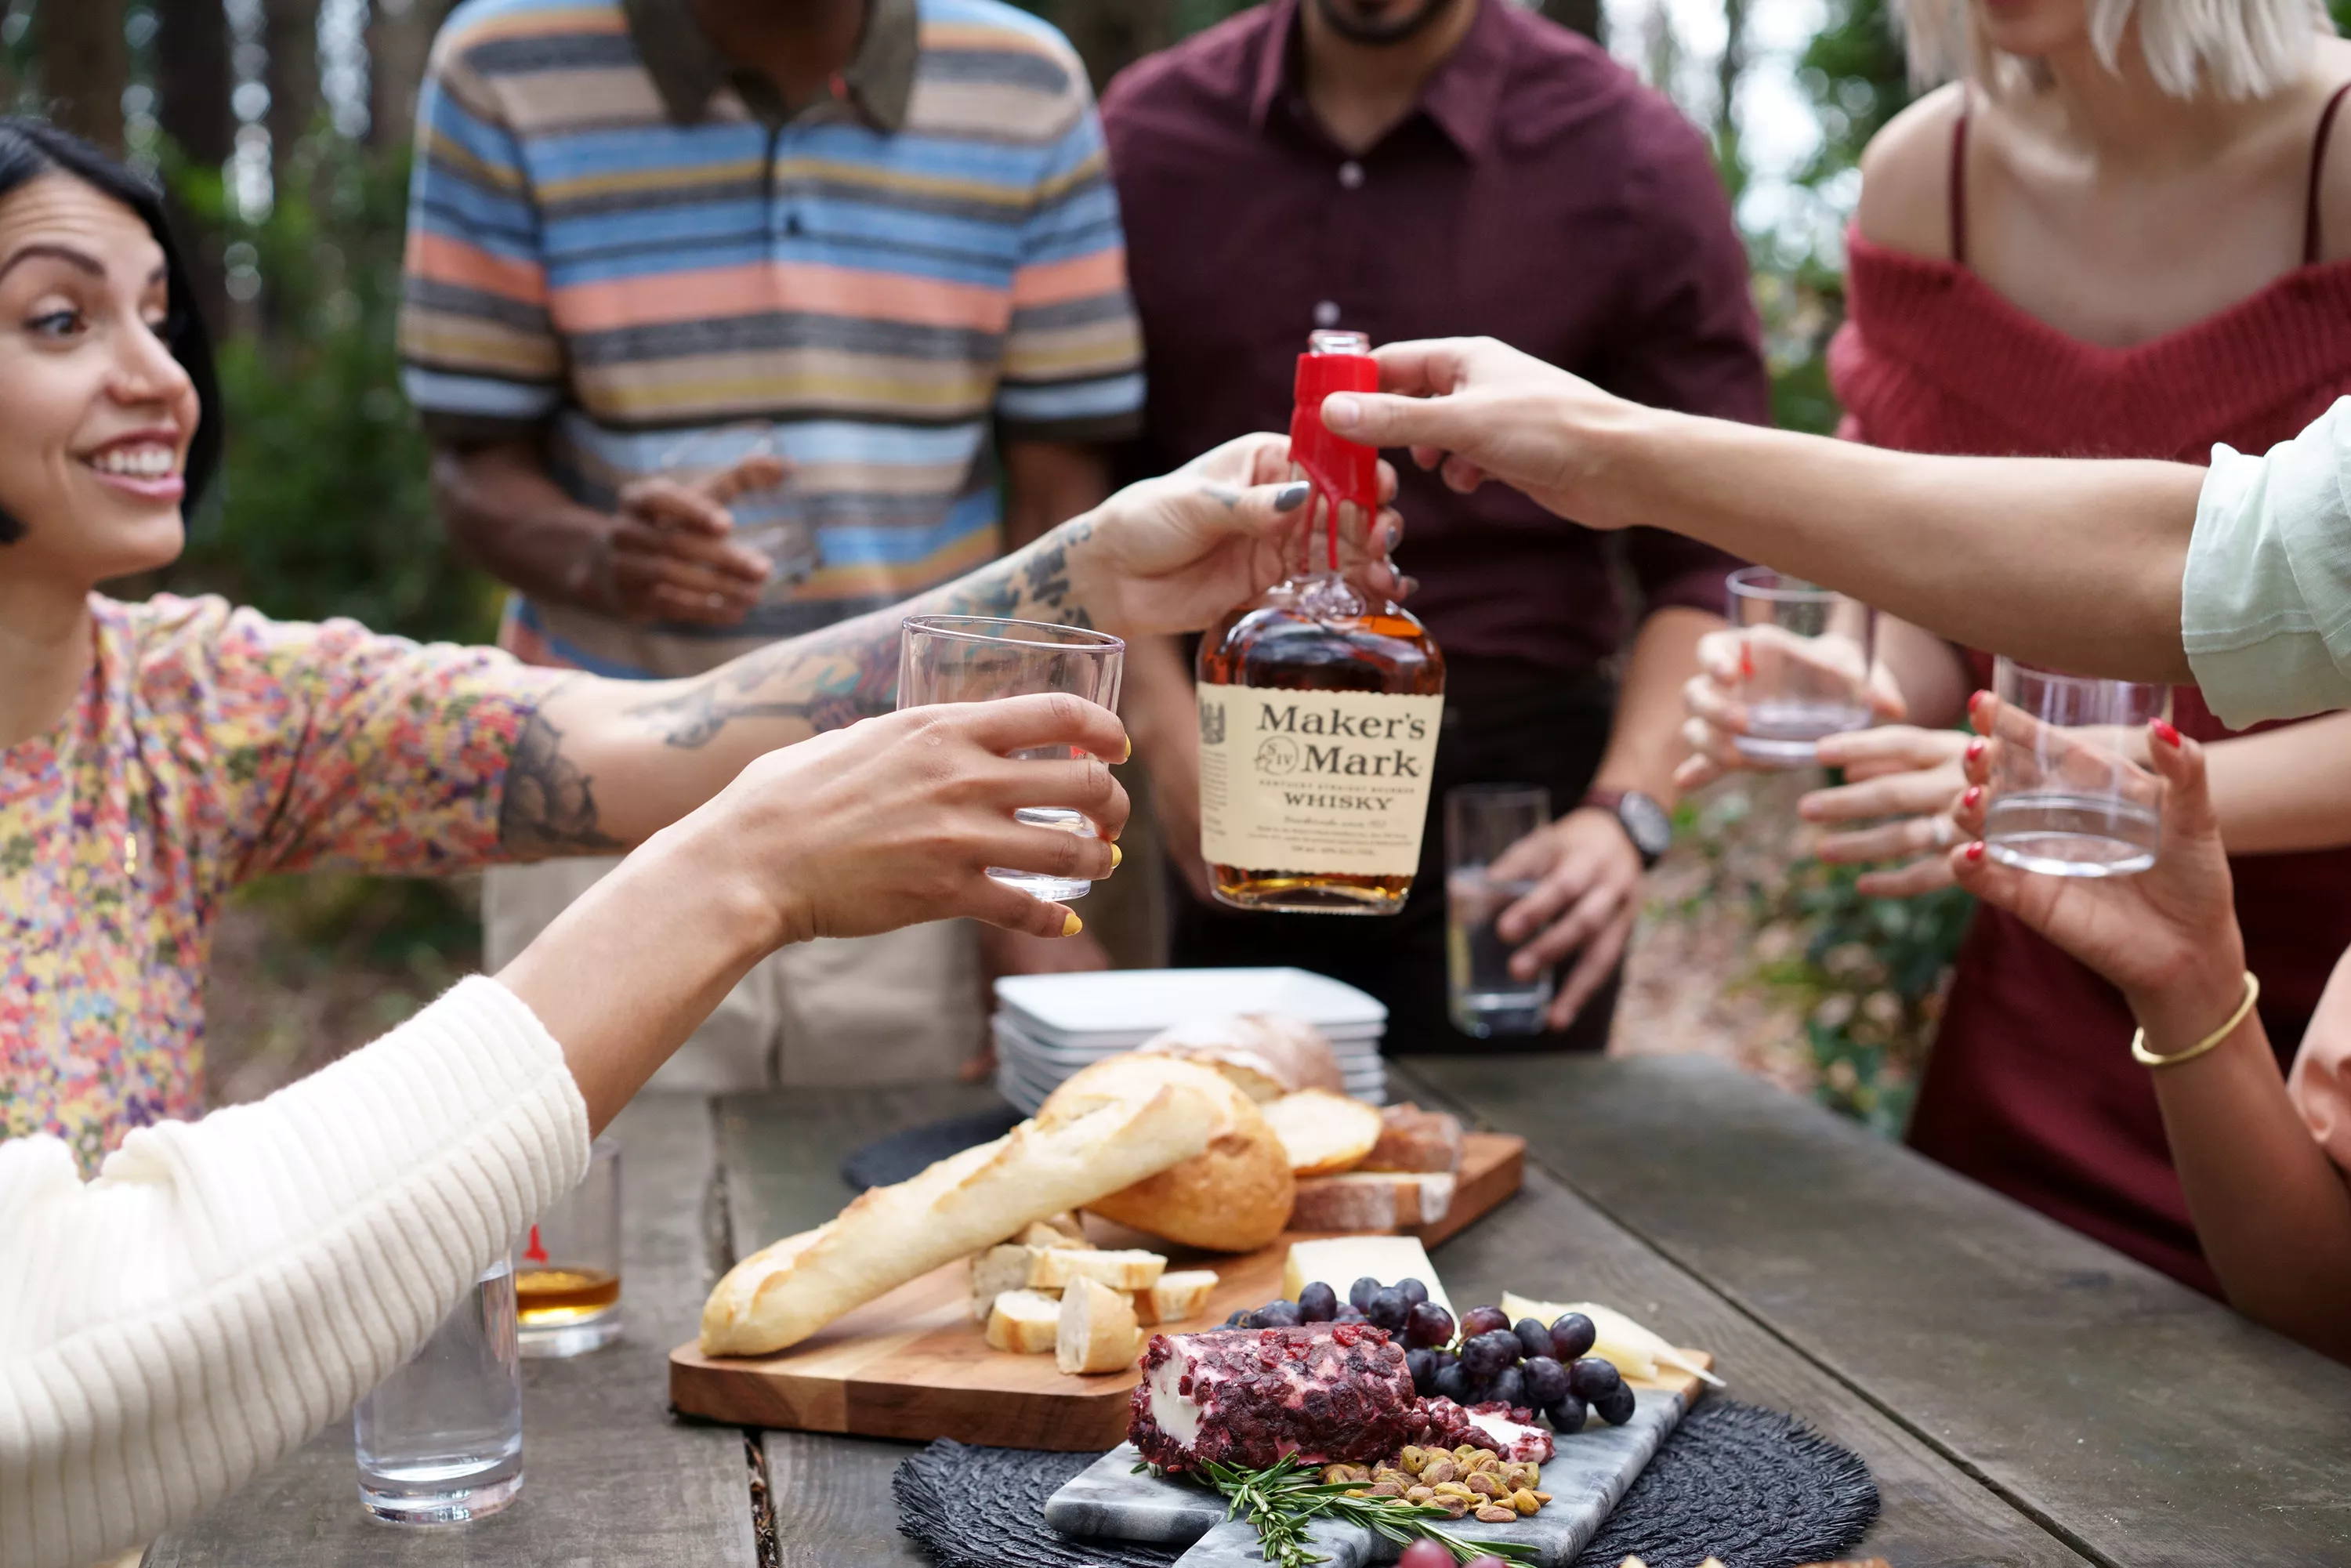 A group of friends outdoors toasting with Maker's Mark bourbon whisky around a picnic table with a charcuterie board set out.